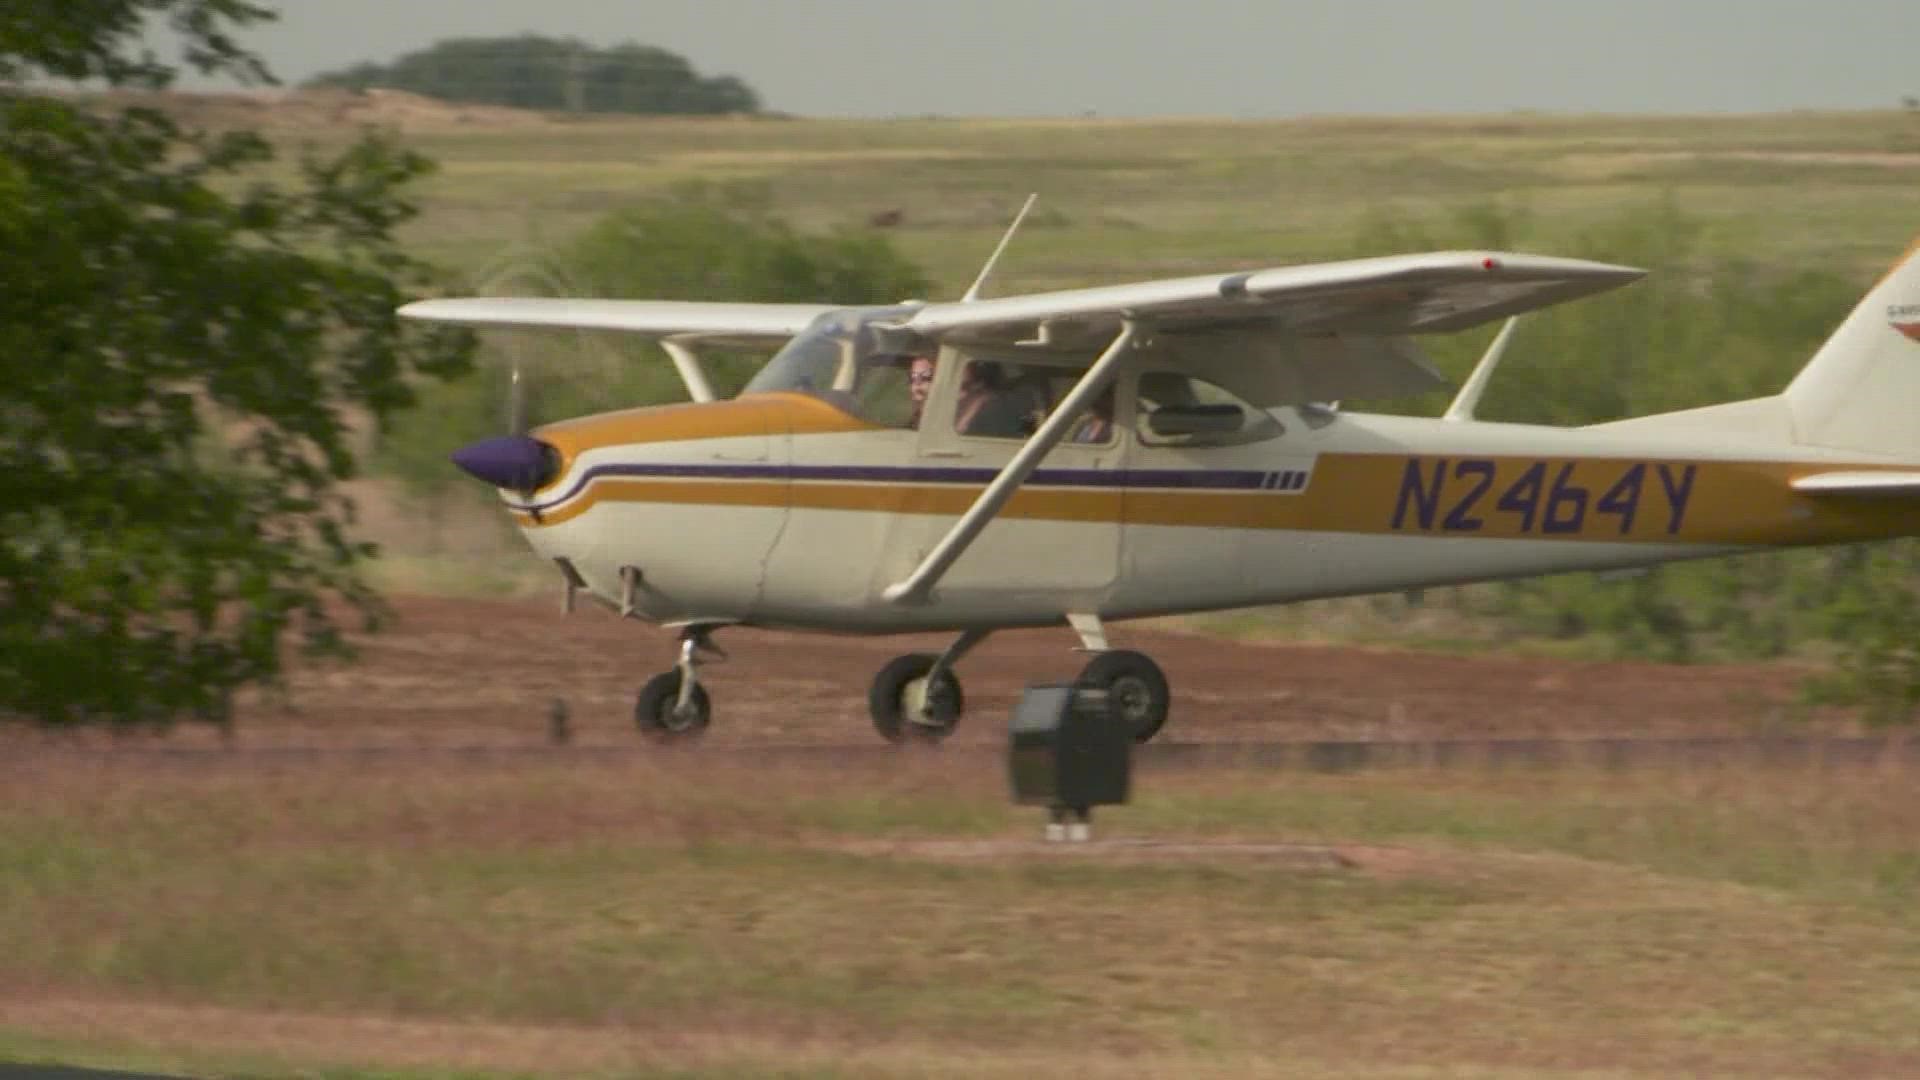 Granbury ISD’s board voted to sell its private plane following several WFAA stories that revealed a district leader repeatedly used the plane for personal trips.